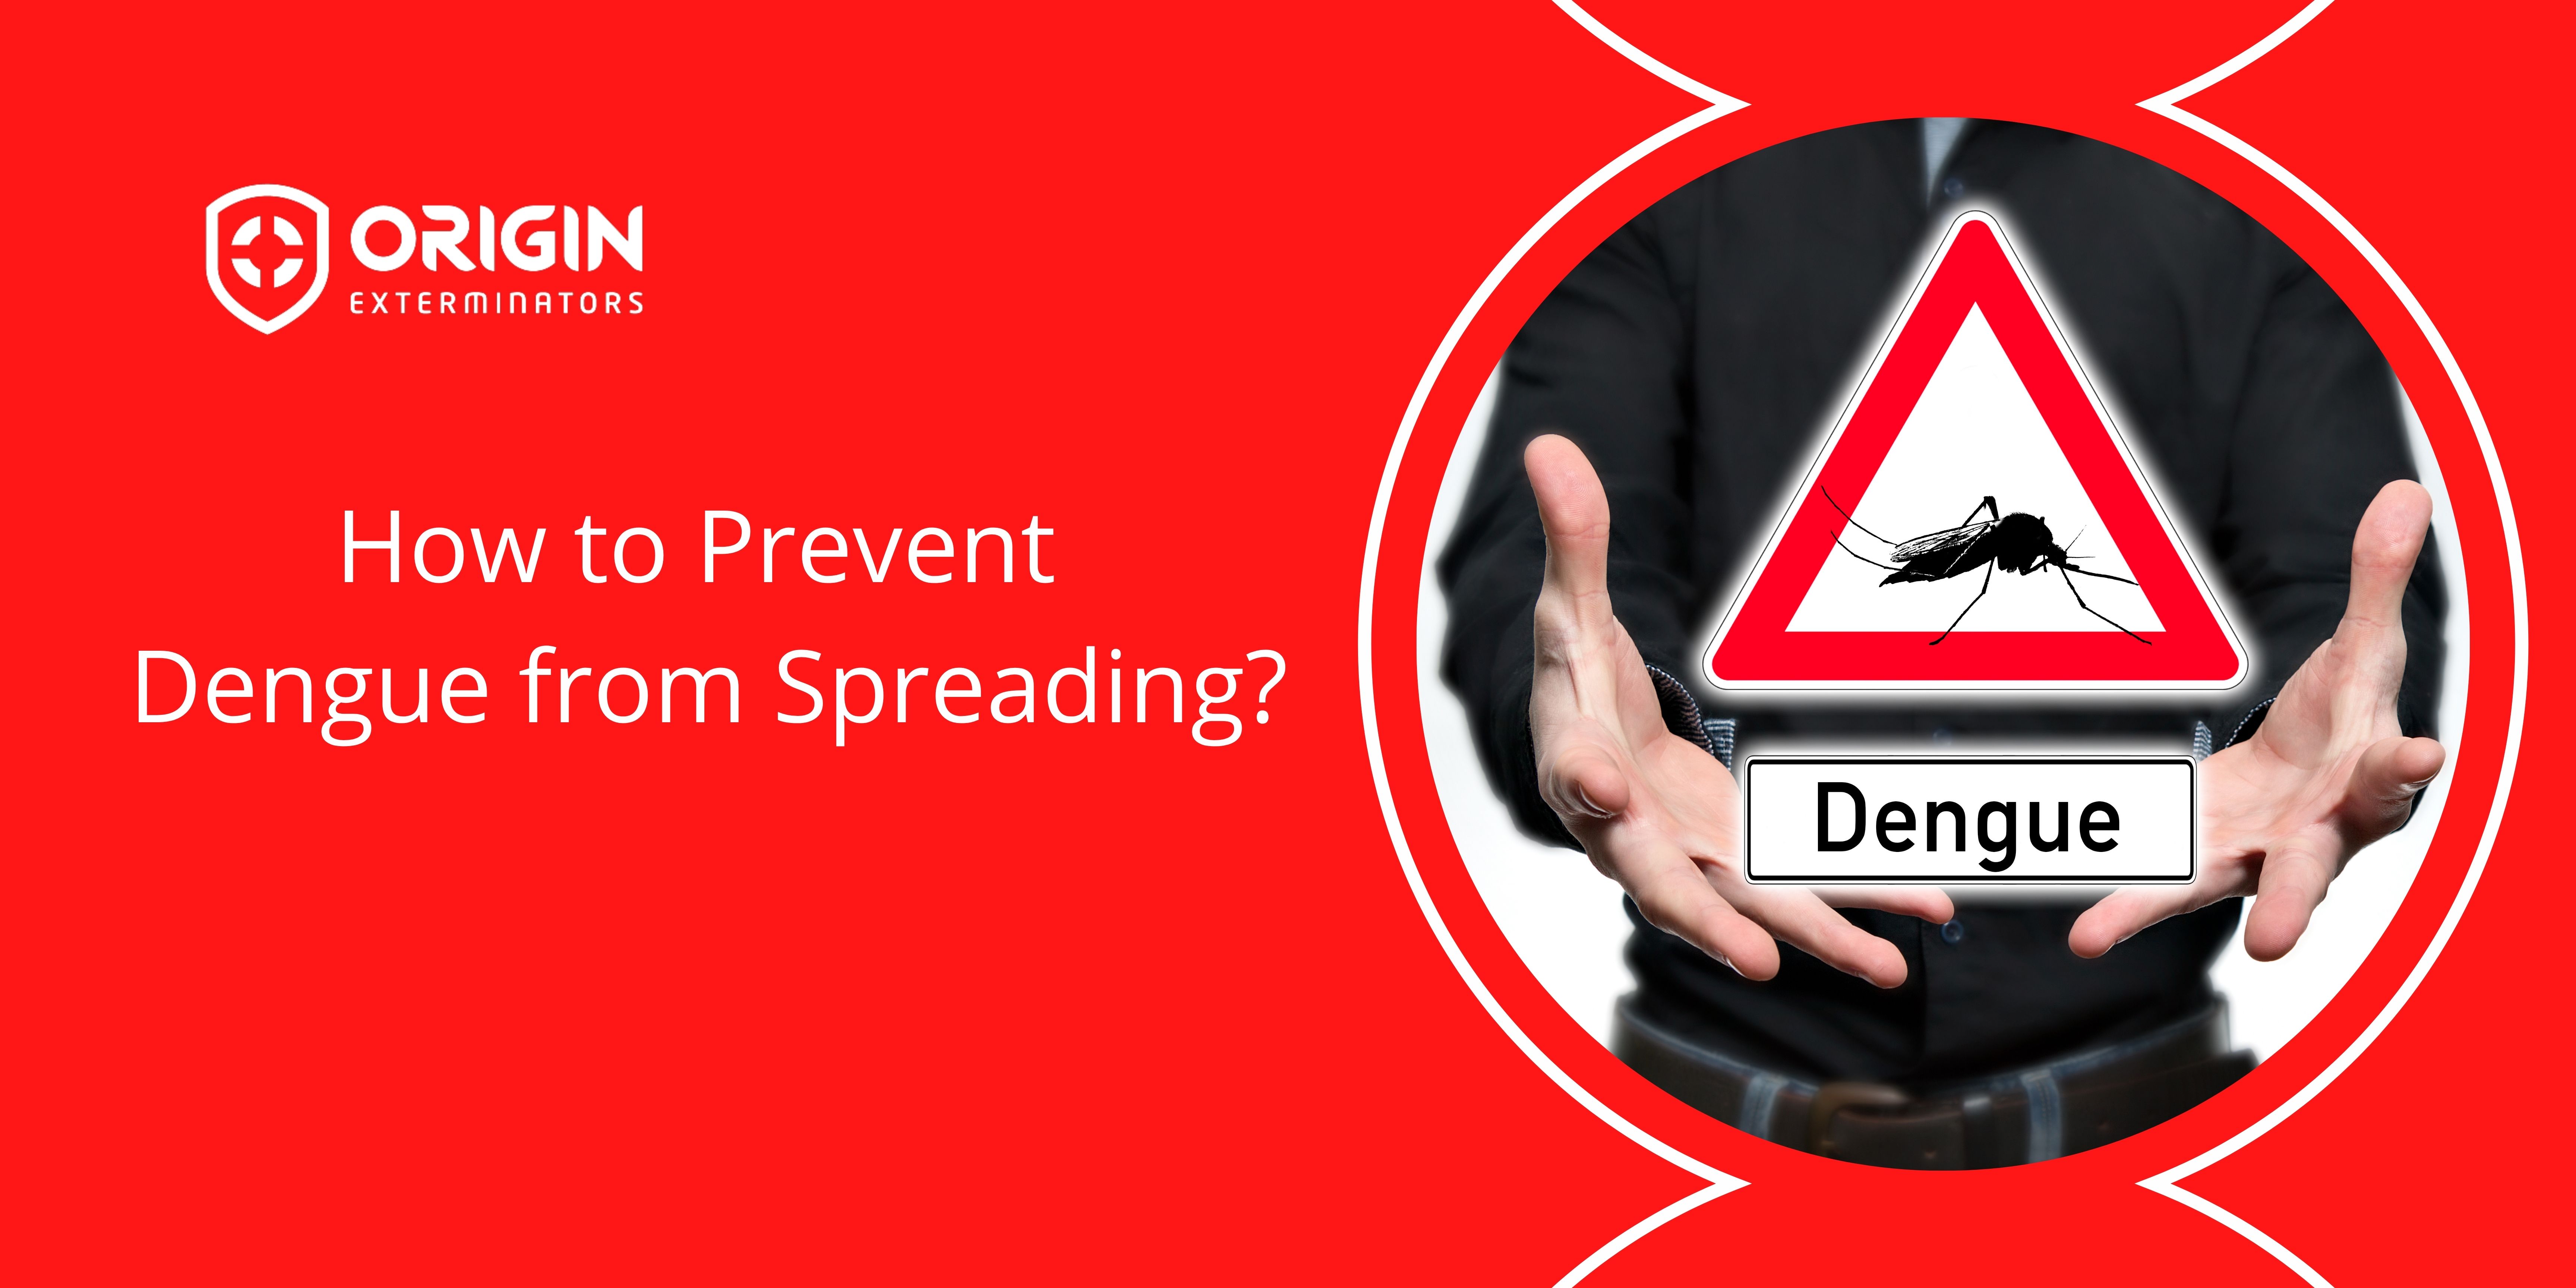 How to Prevent Dengue from Spreading?